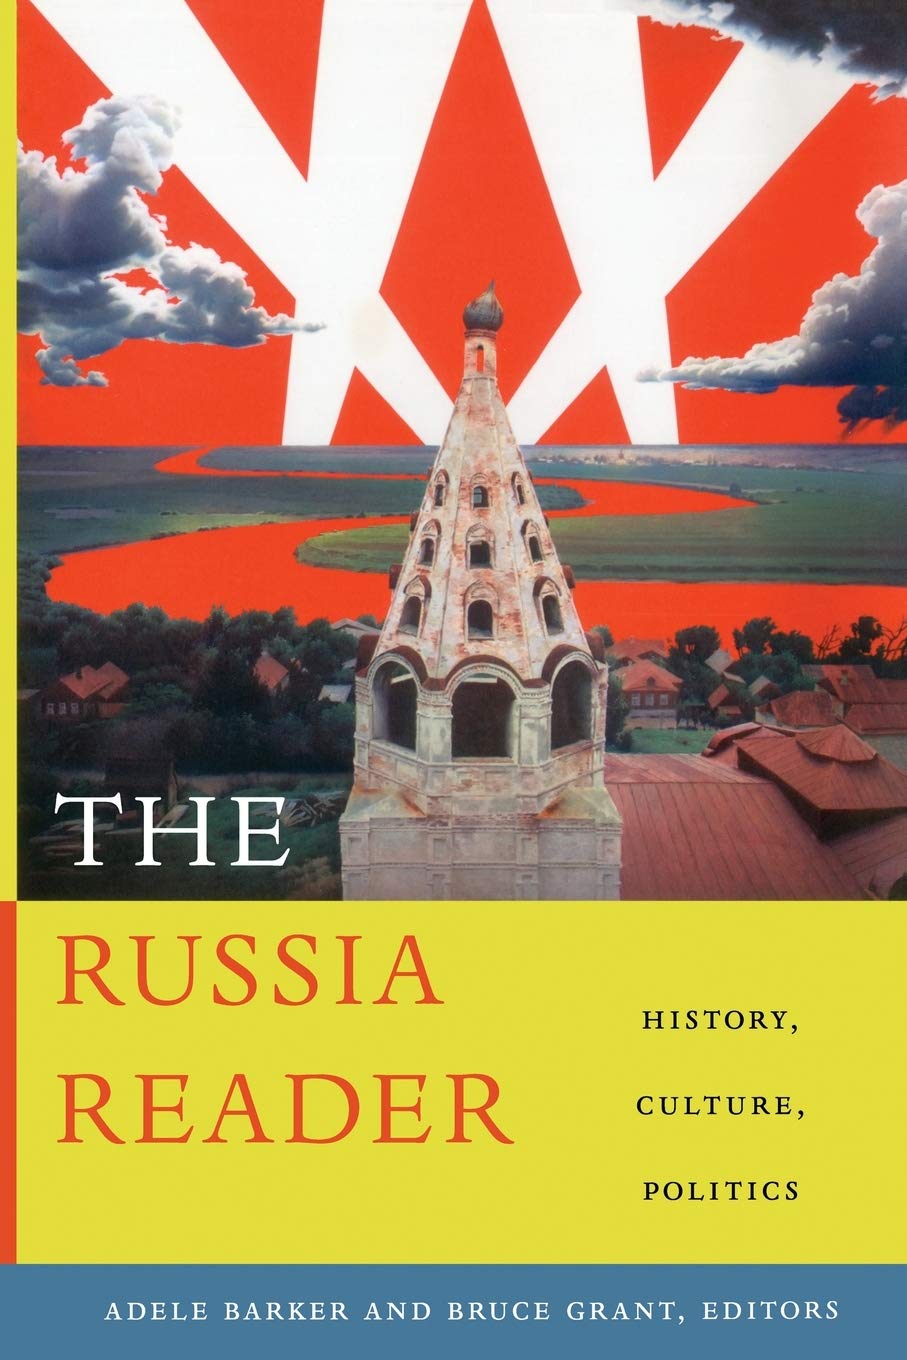 The Russia Reader: History, Culture, Politics (The World Readers)